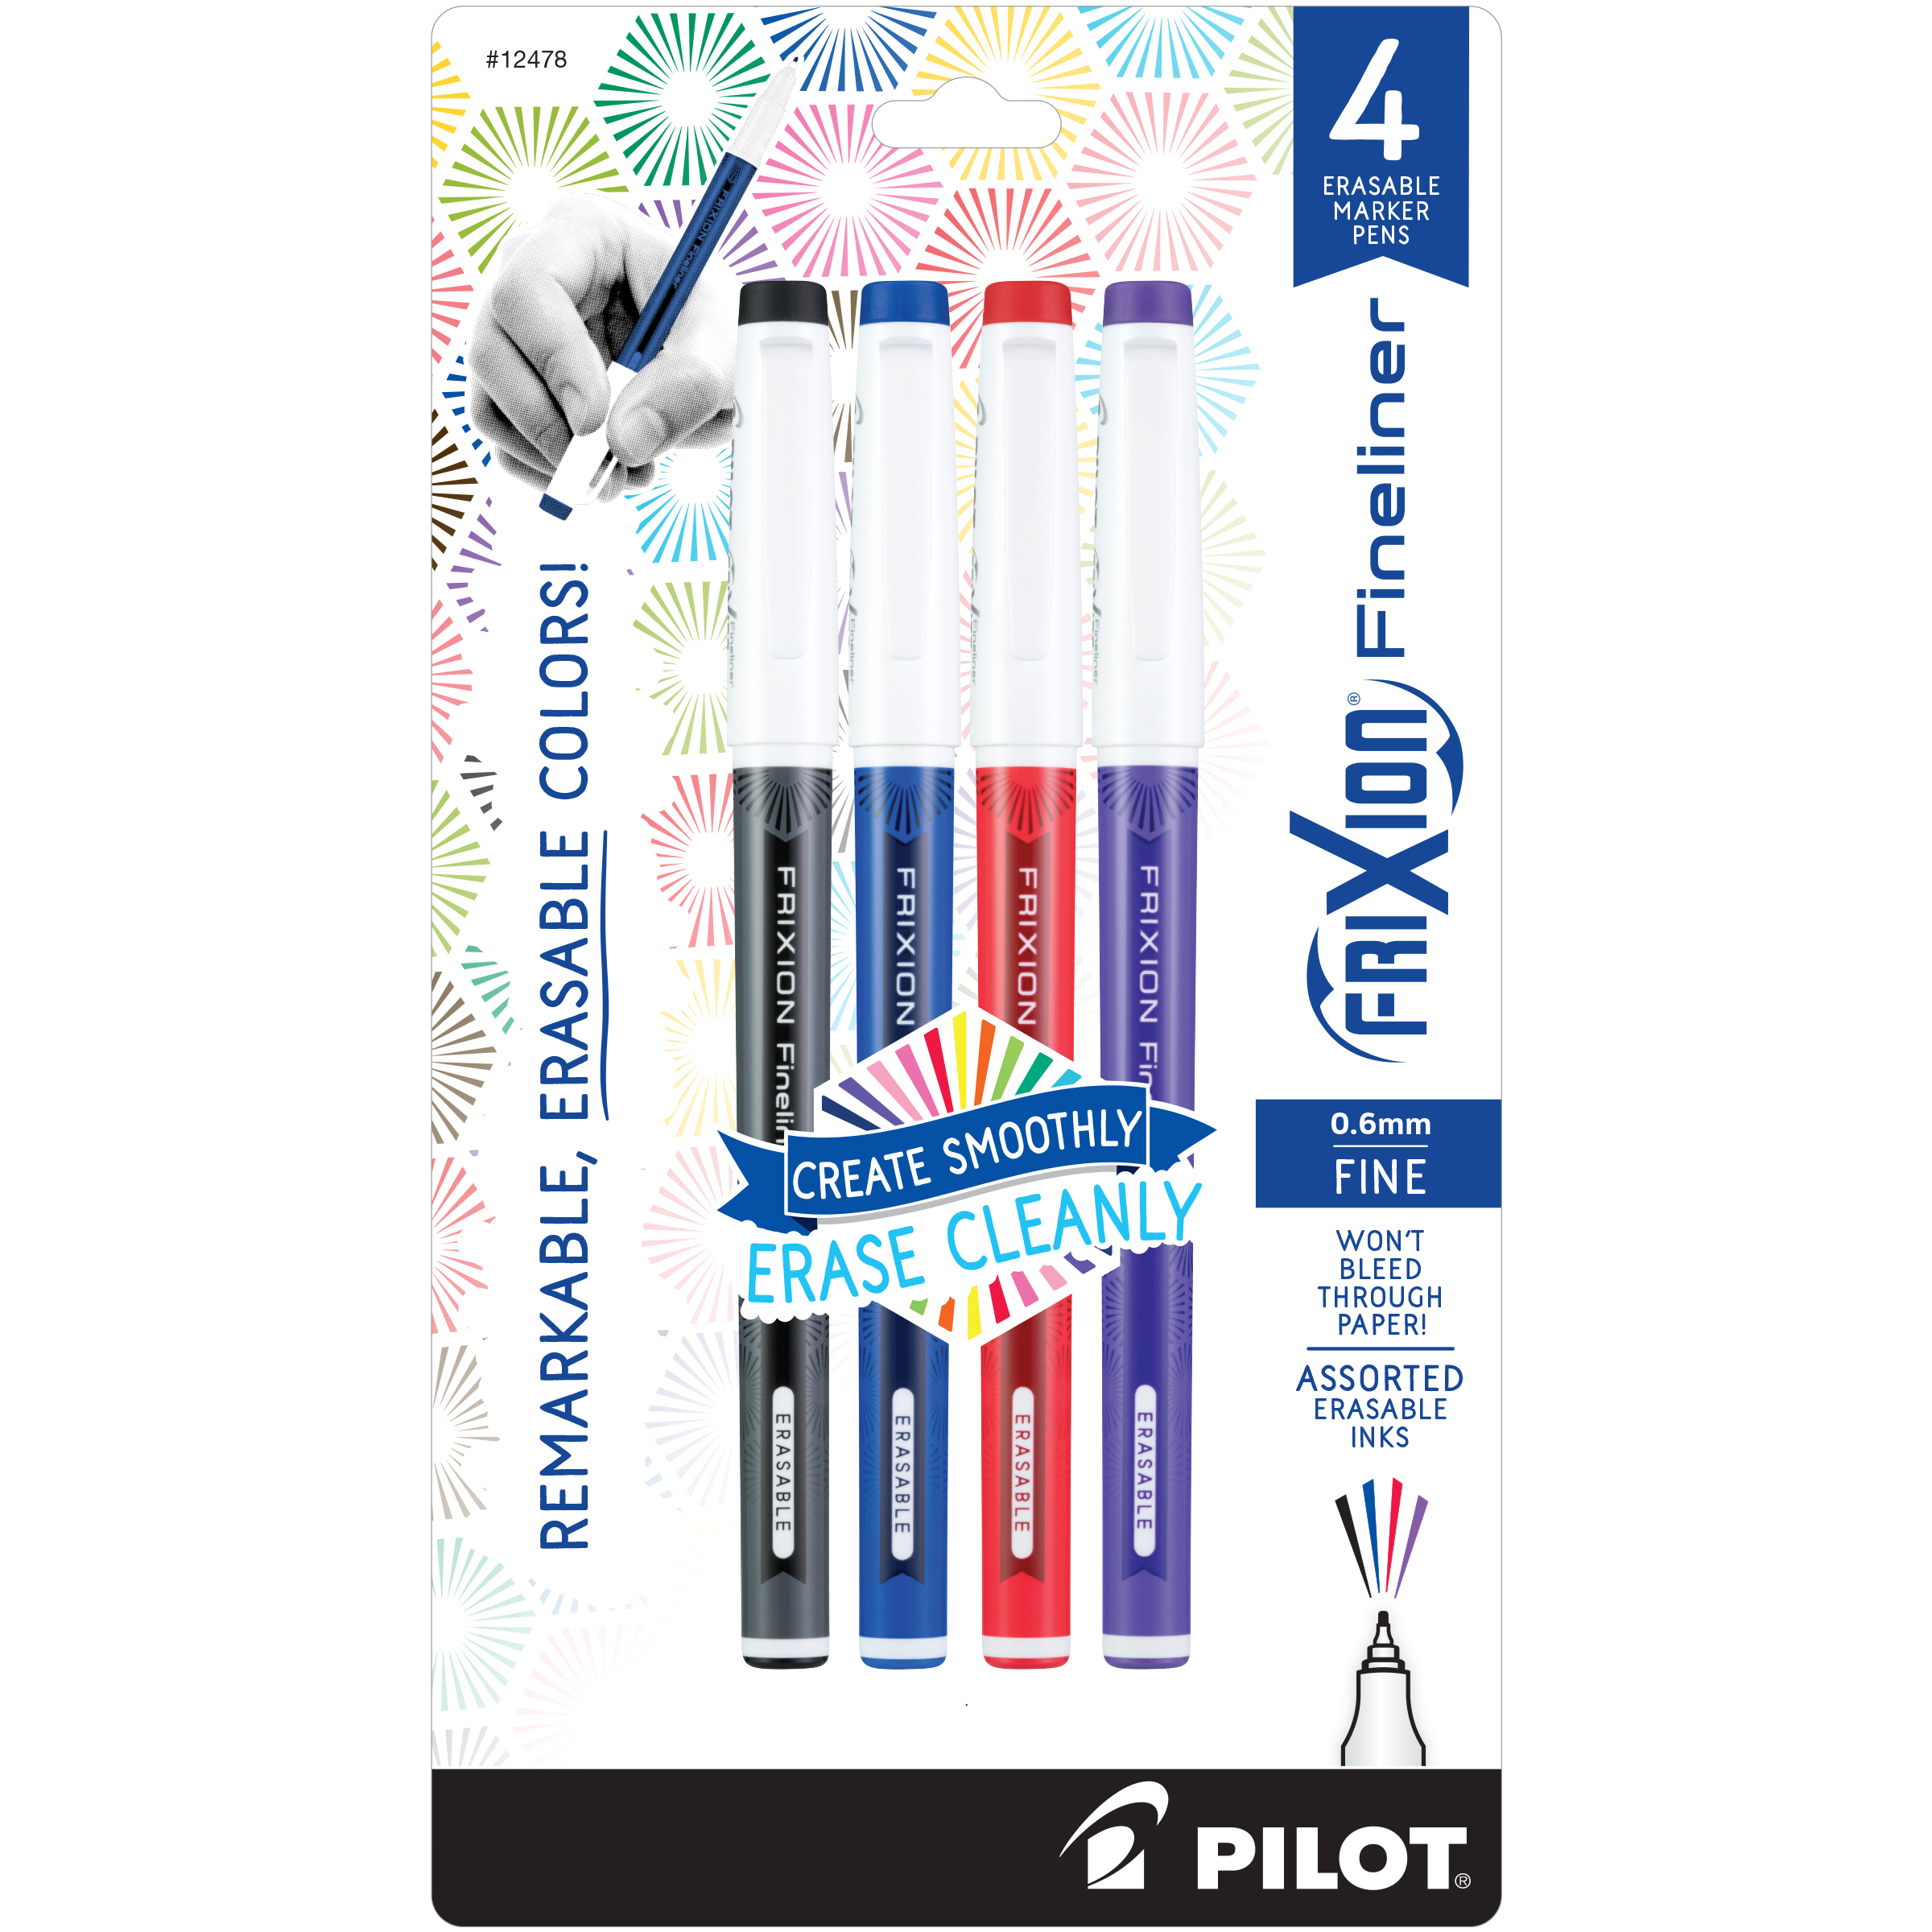 PILOT FRIXION FINELINER 4-PACK - includes black, blue, red and purple